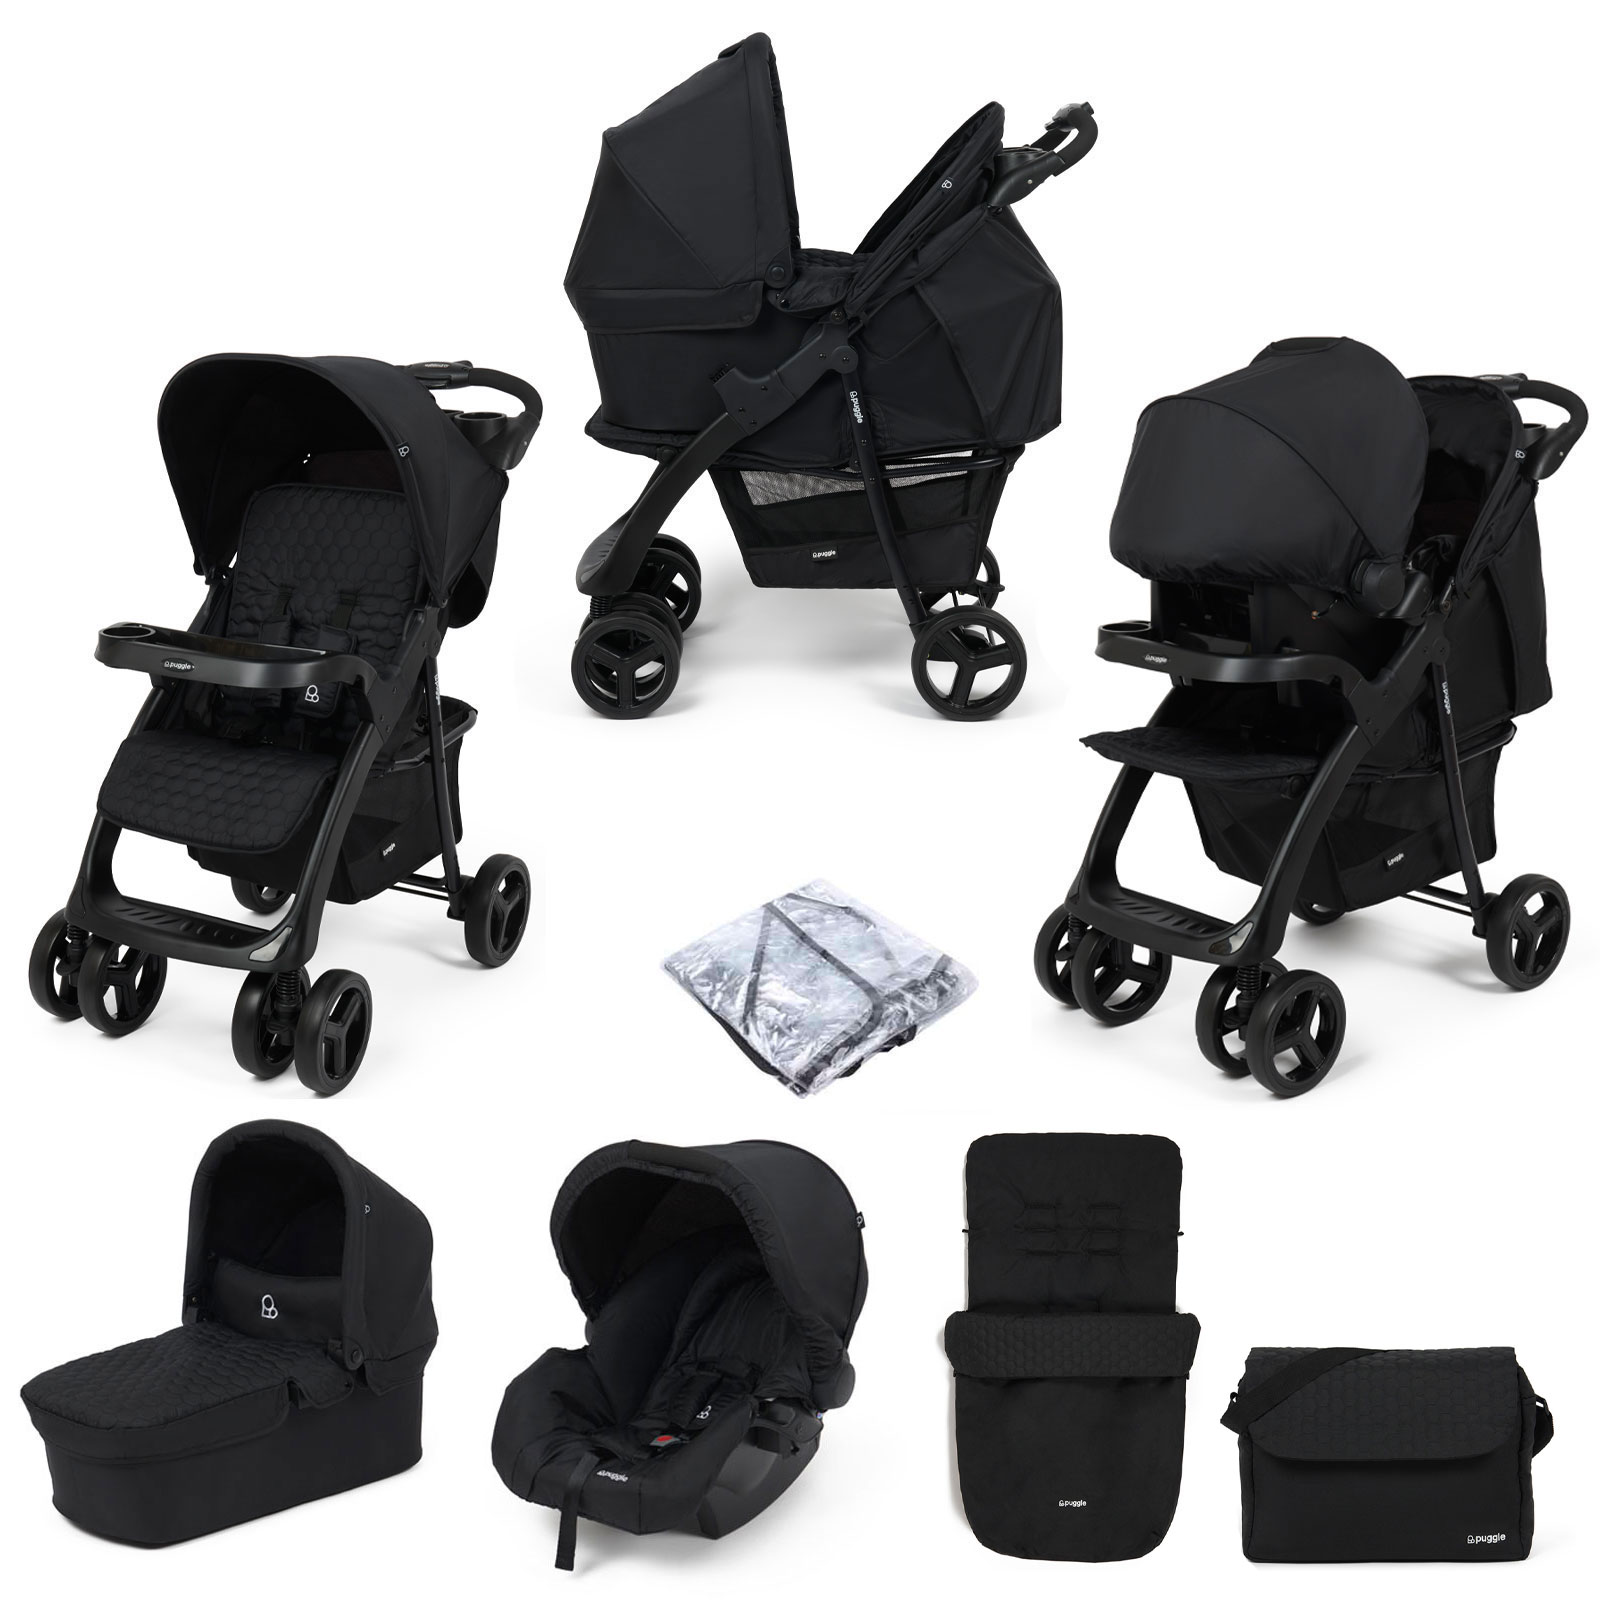 Puggle Denver Luxe 3in1 Travel System with Raincover, Footmuff & Changing Bag - Storm Black